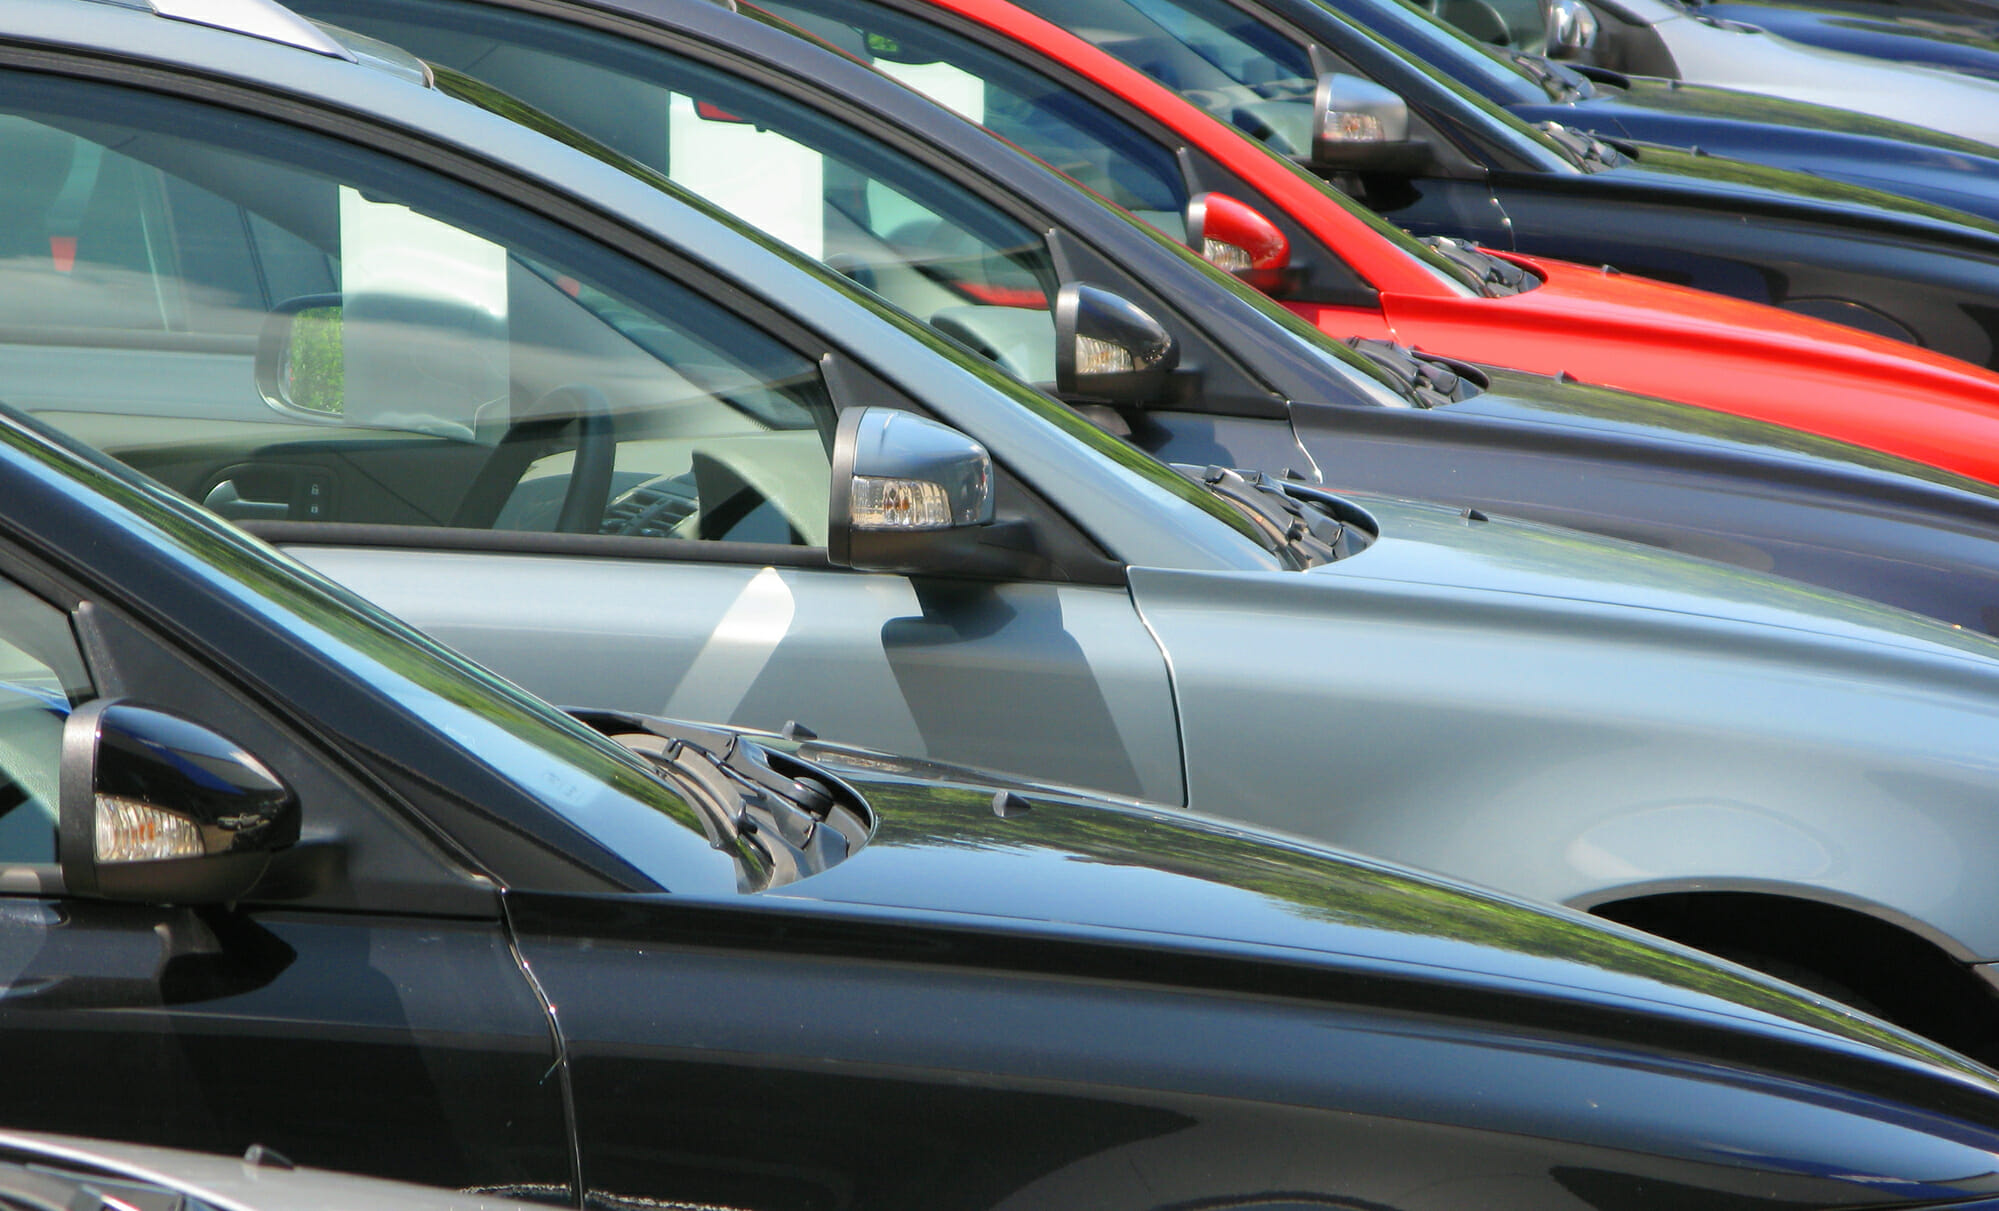 5 Used Cars You Should Buy